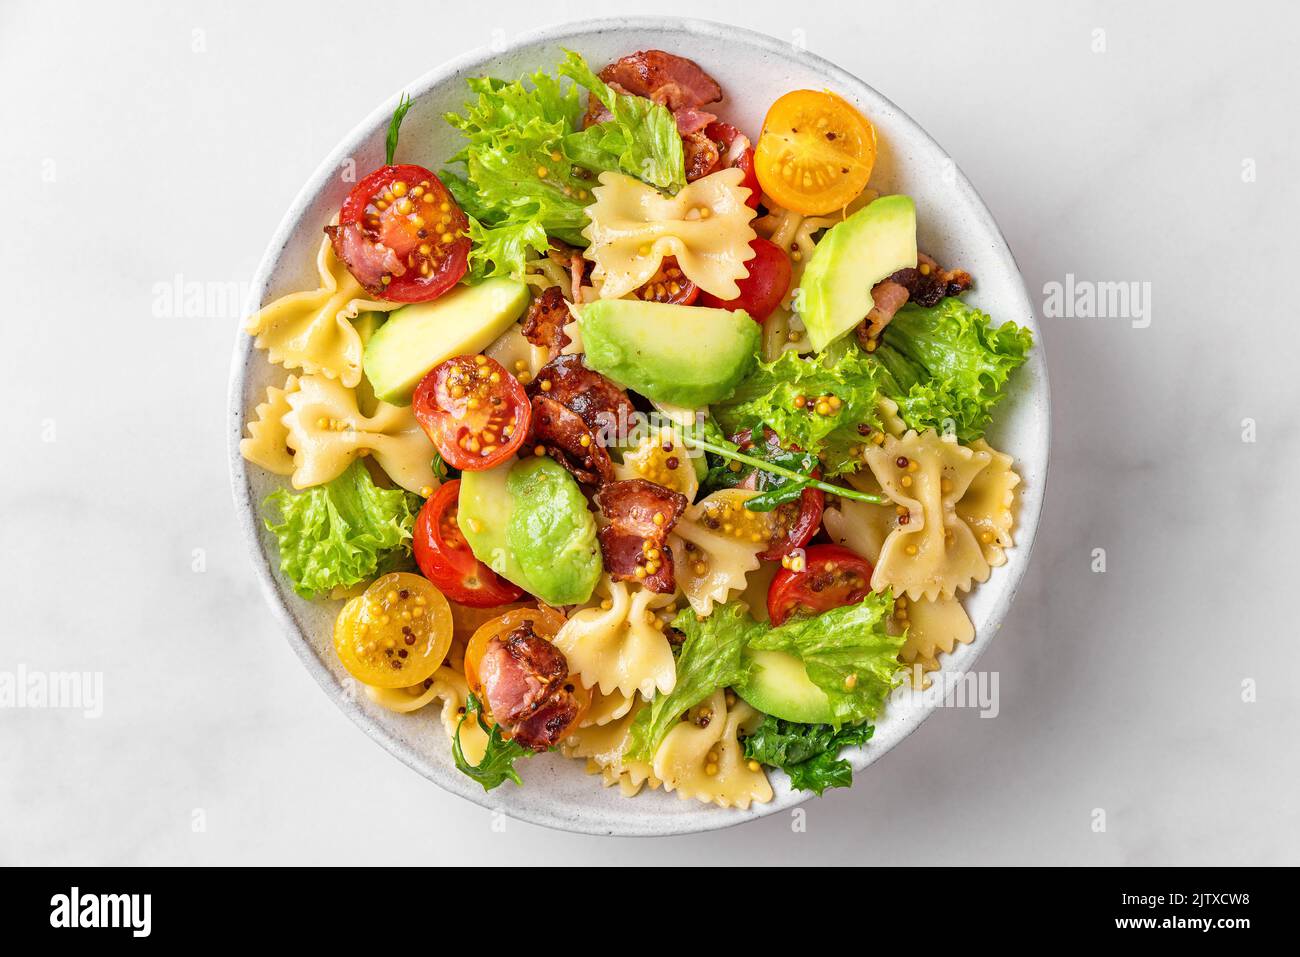 Pasta farfalle salad with tomato, bacon, avocado and mustard dressing in a plate on white table. Top view. Healthy italian food Stock Photo